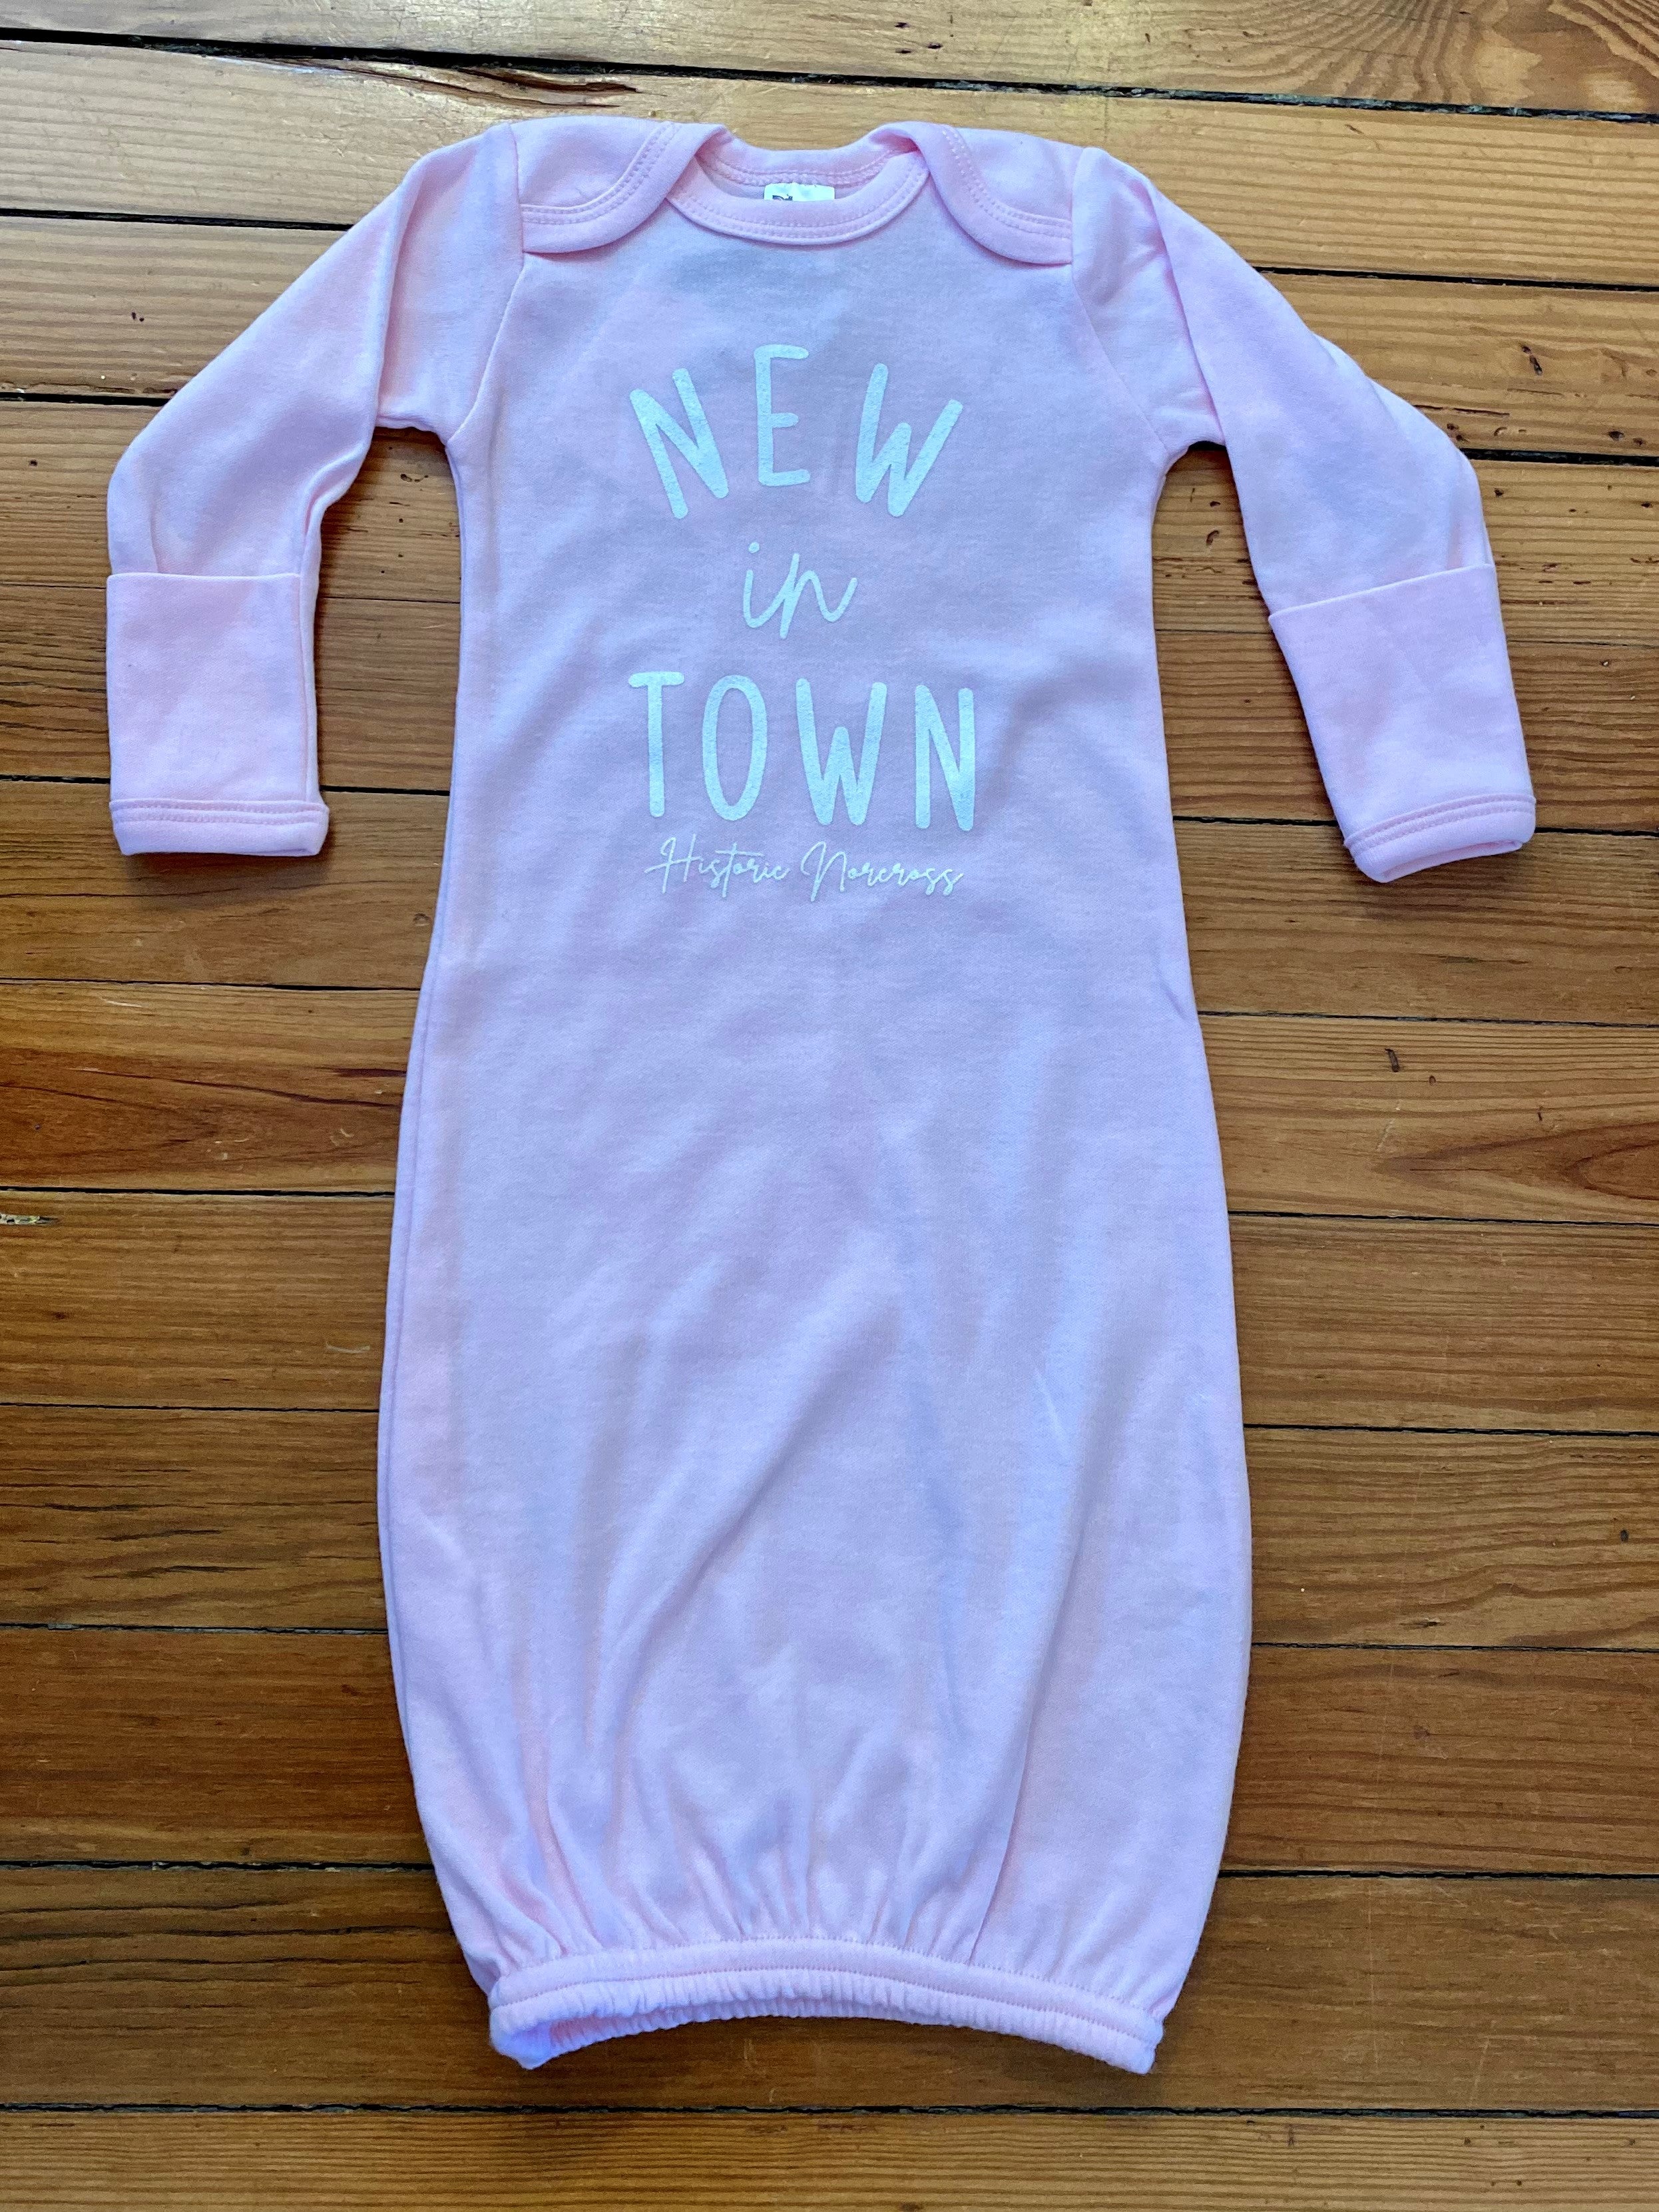 Historic Norcross "New In Town" Infant Onesie & Gown